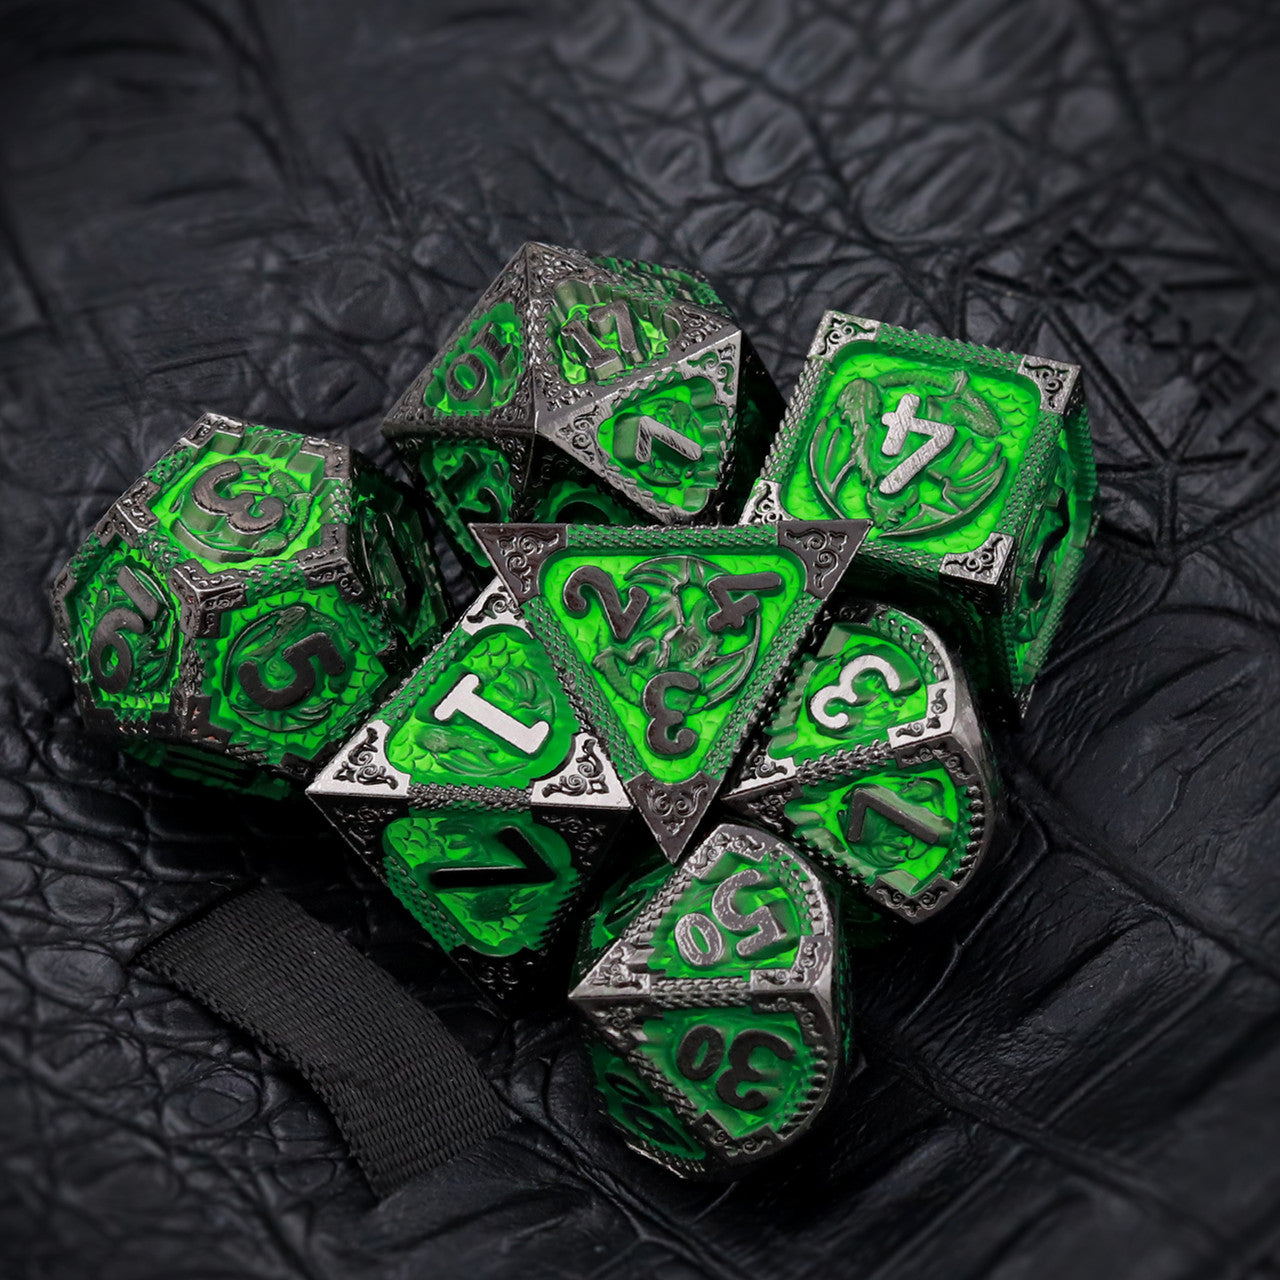 Haxtec Fire-breathing Dragon Pattern Black Matt Green Metal DND Dice Set With Leather Dice Bag for Dungoens and Dragons RPG Gifts